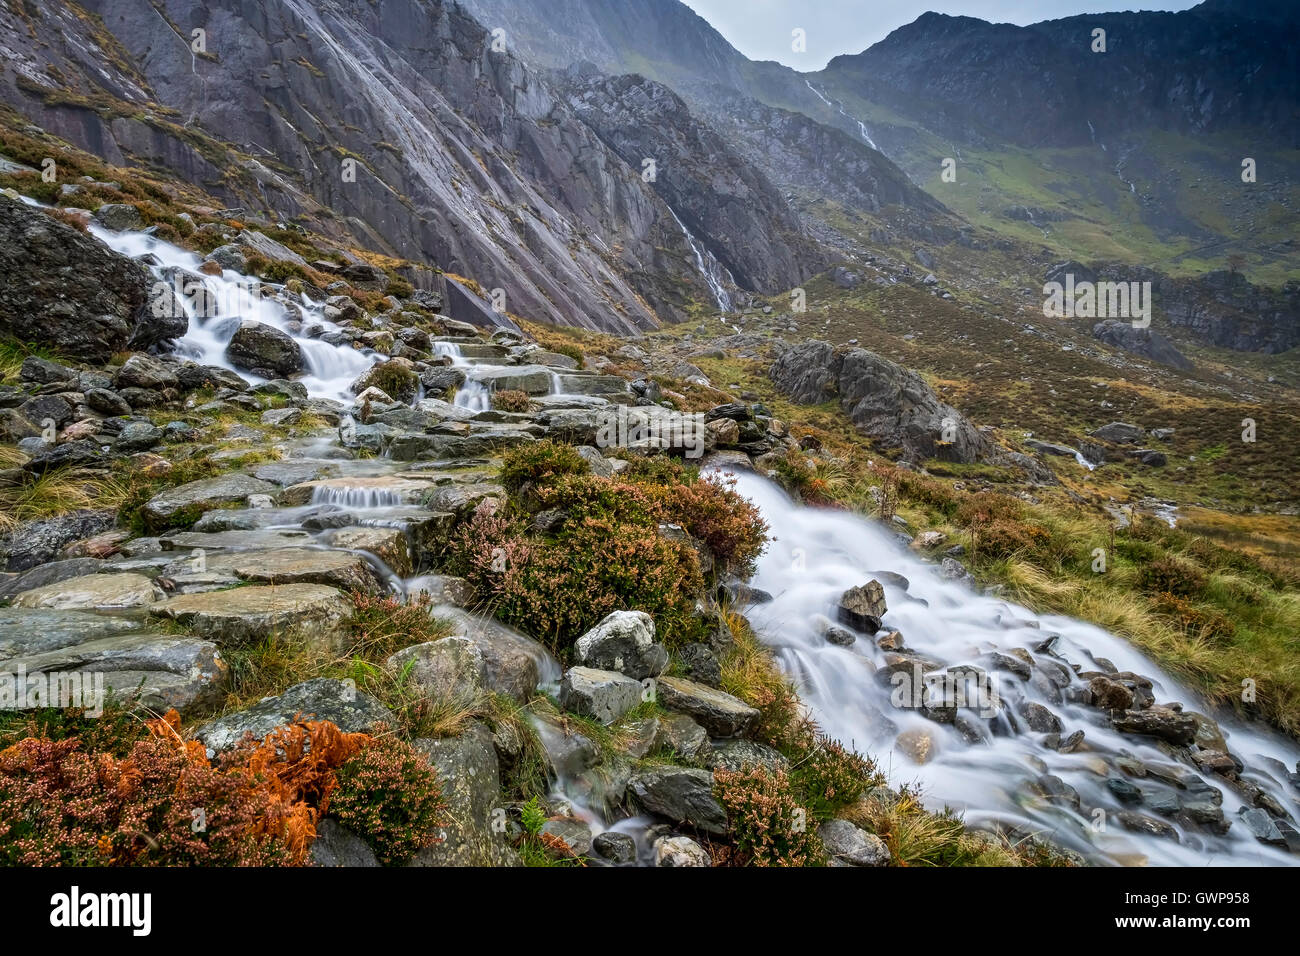 A Flash Flood Covers the Footpath below Idwal Slabs, Cwm Idwal, Snowdonia National Park, North Wales, UK Stock Photo